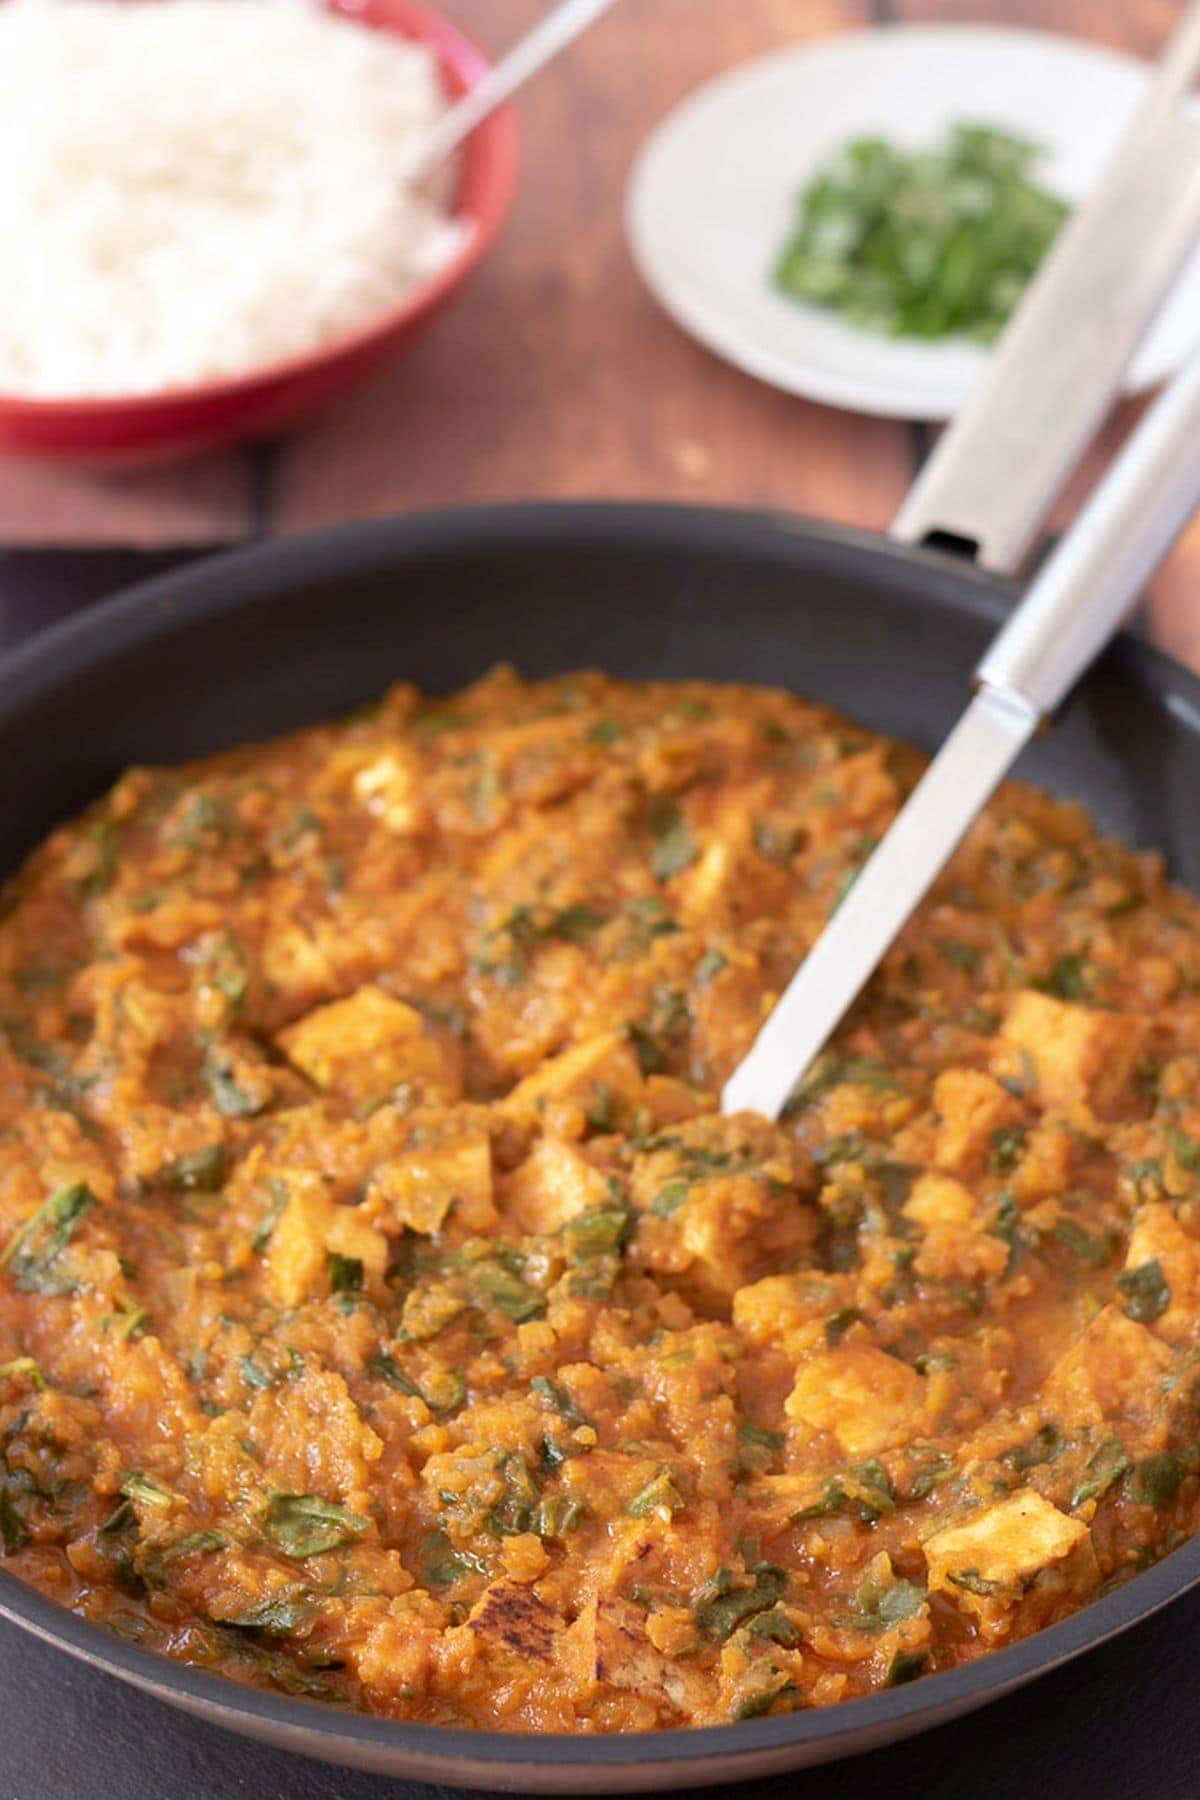 A pan of cooked tofu spinach curry with a spoon in it ready to serve.